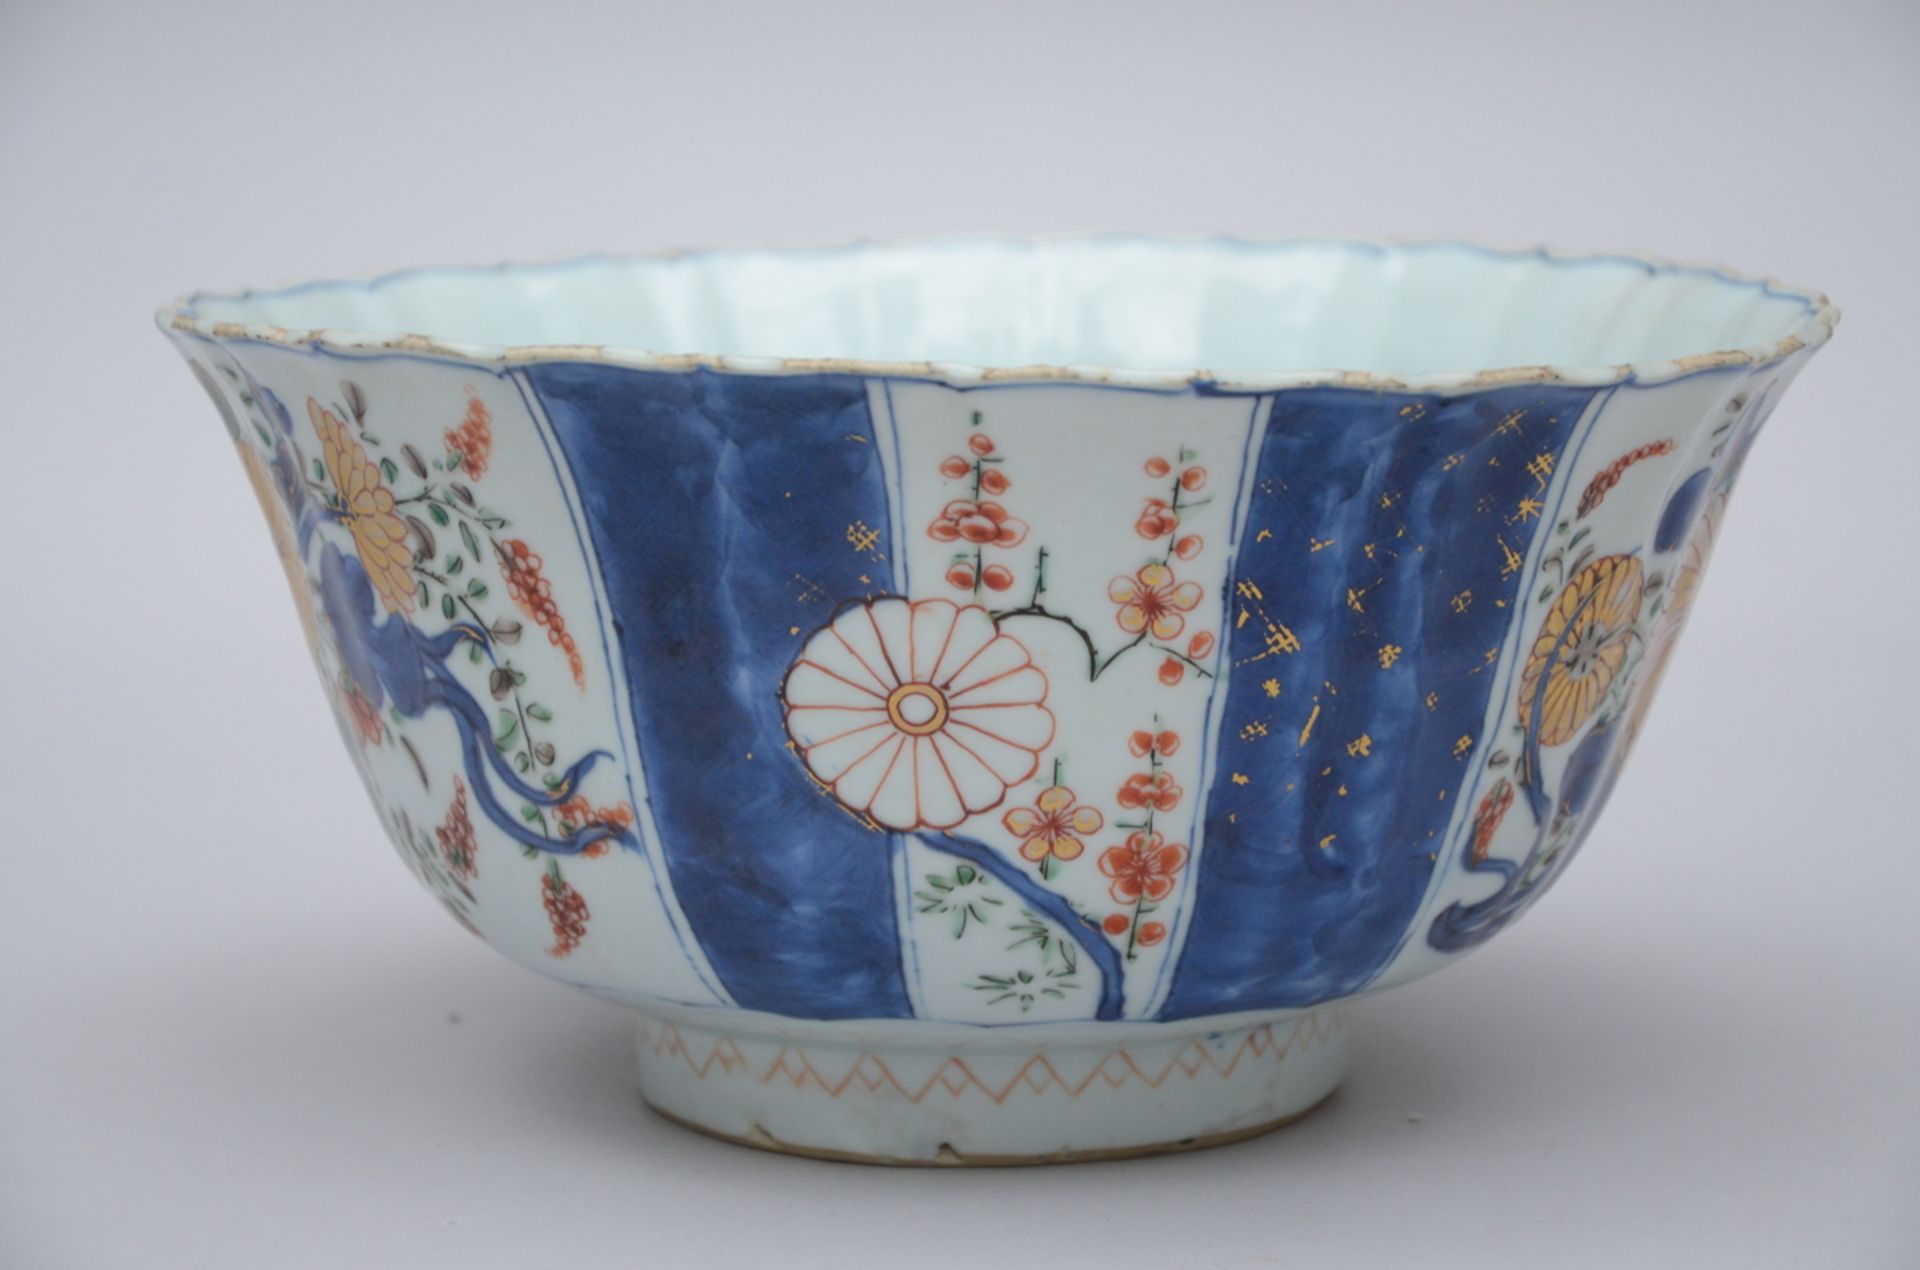 Lobed bowl in Chinese famille verte porcelain, Kangxi period (13x25.5 cm) - Image 4 of 4